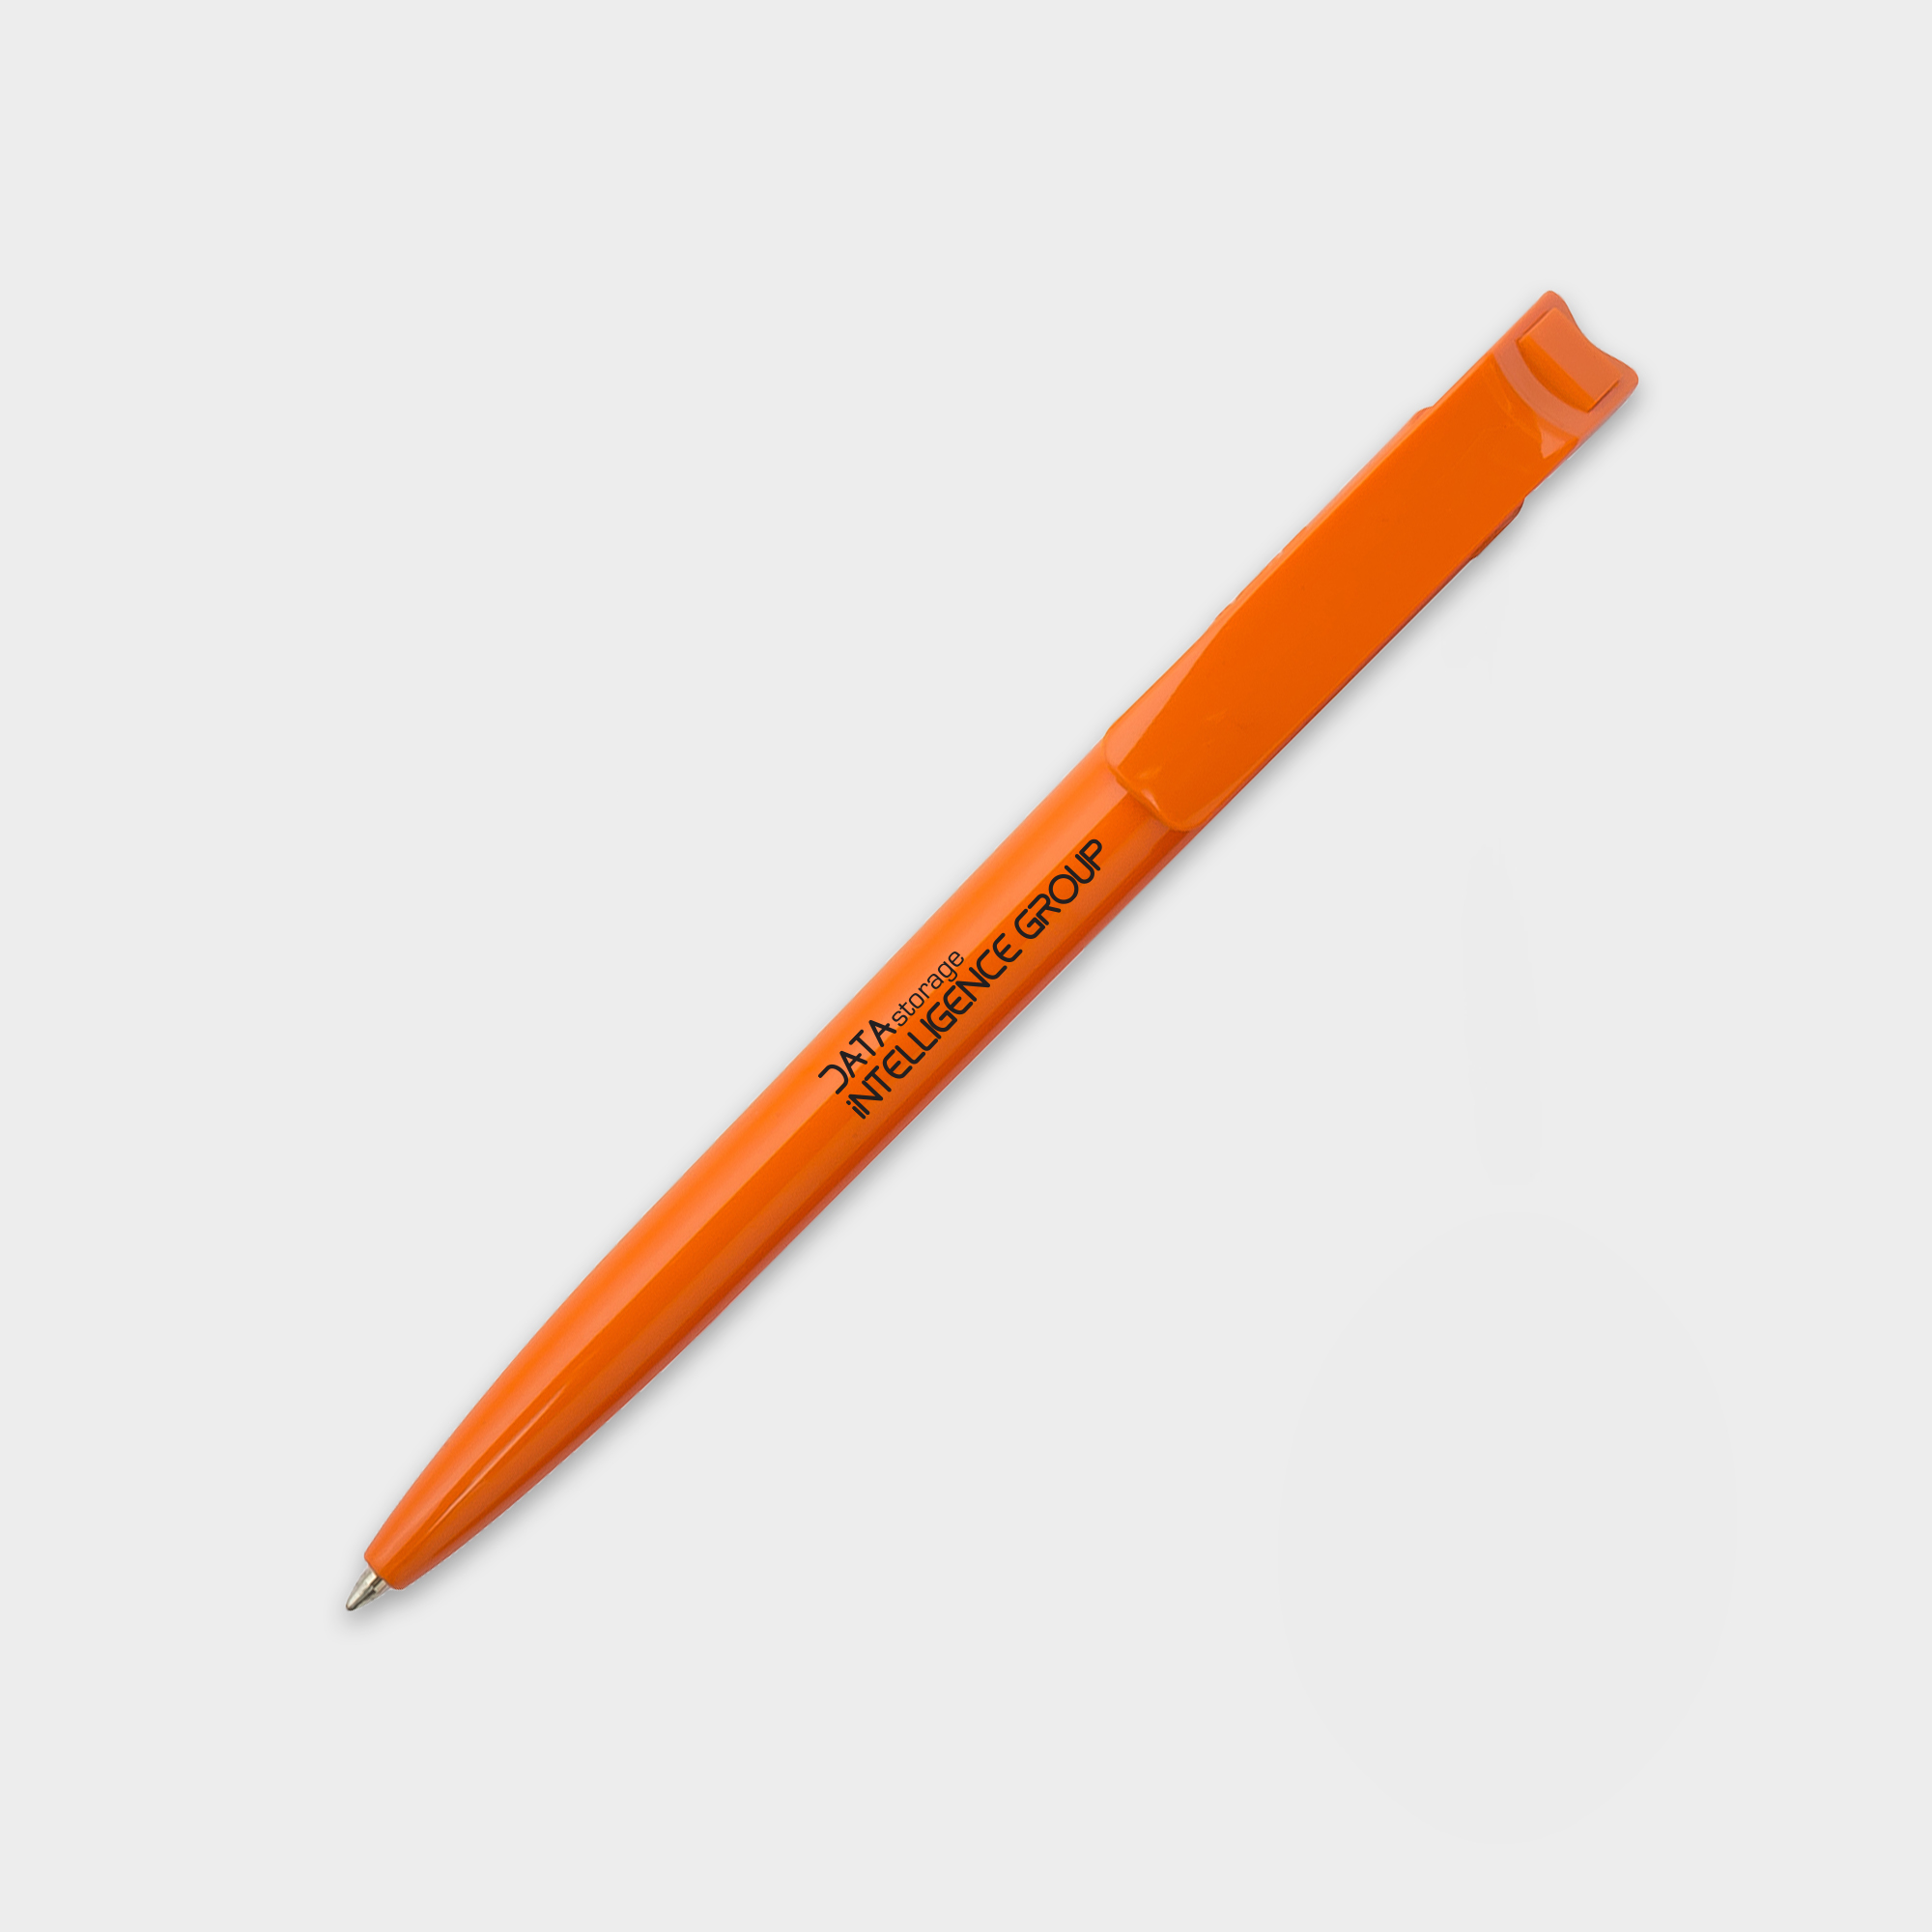 The Green & Good Litani Pen. An eco-friendly and high-quality pen made from recycled plastic bottles (rPET) with black ink refills and a solid colour body. Made in the EU and available in a variety of colours. Orange